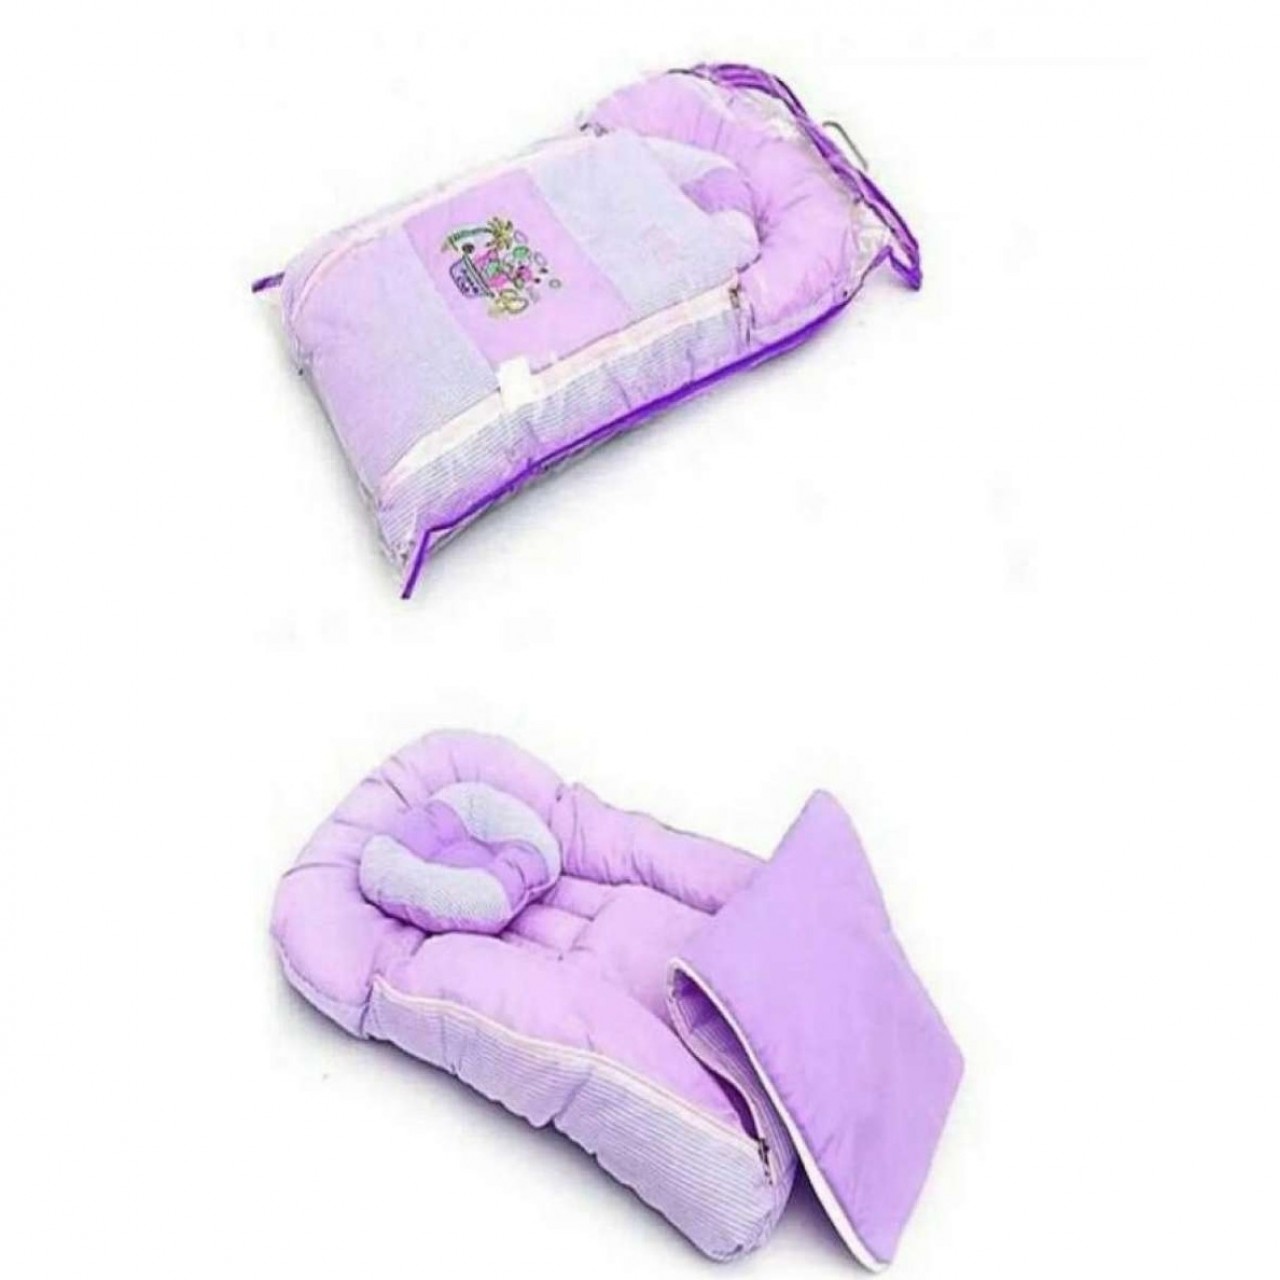 New Born Baby Carrying Bag - Cotton Bed With Pillow